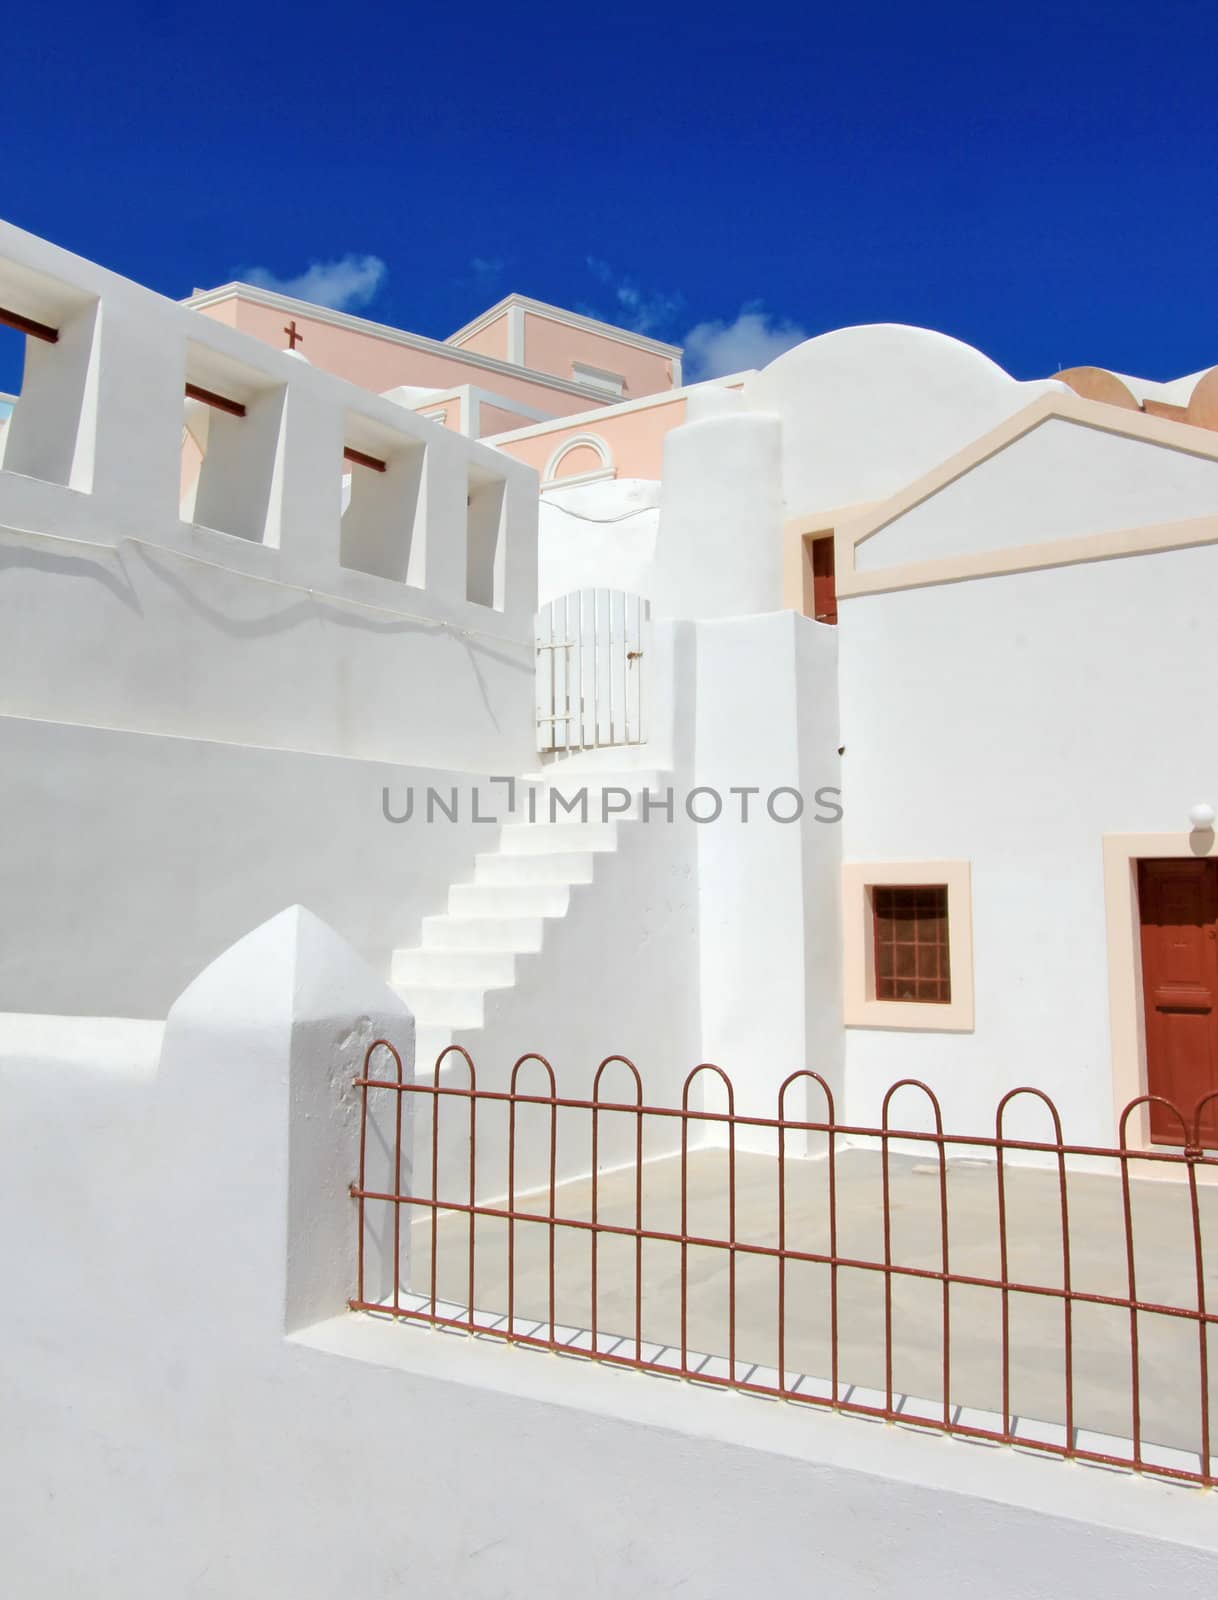 Typical new white house in Santorini, Greece, by beautiful weather